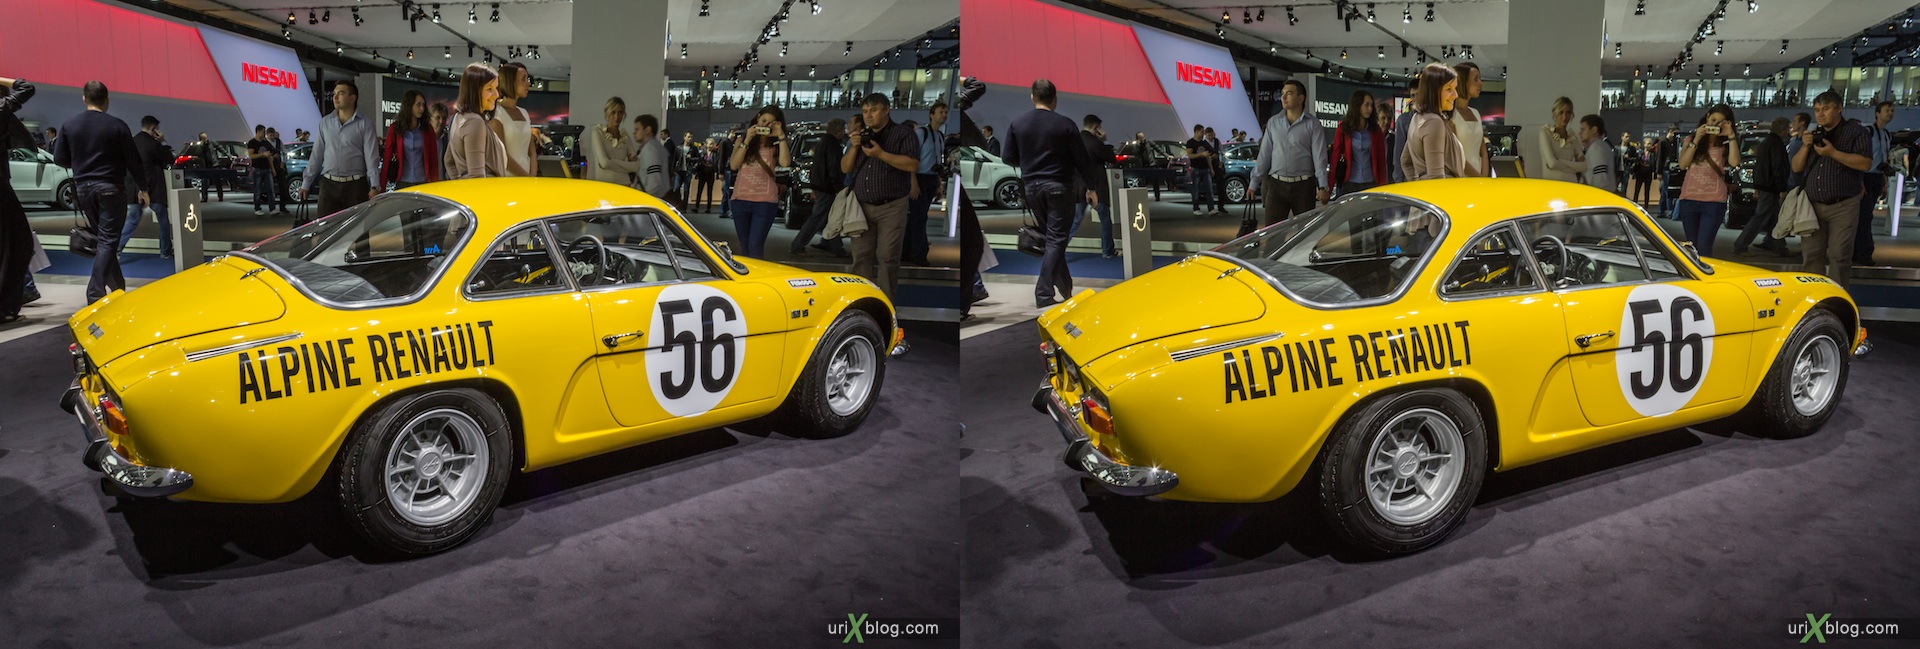 2012, Alpine Renault, Moscow International Automobile Salon, auto show, 3D, stereo pair, cross-eyed, crossview